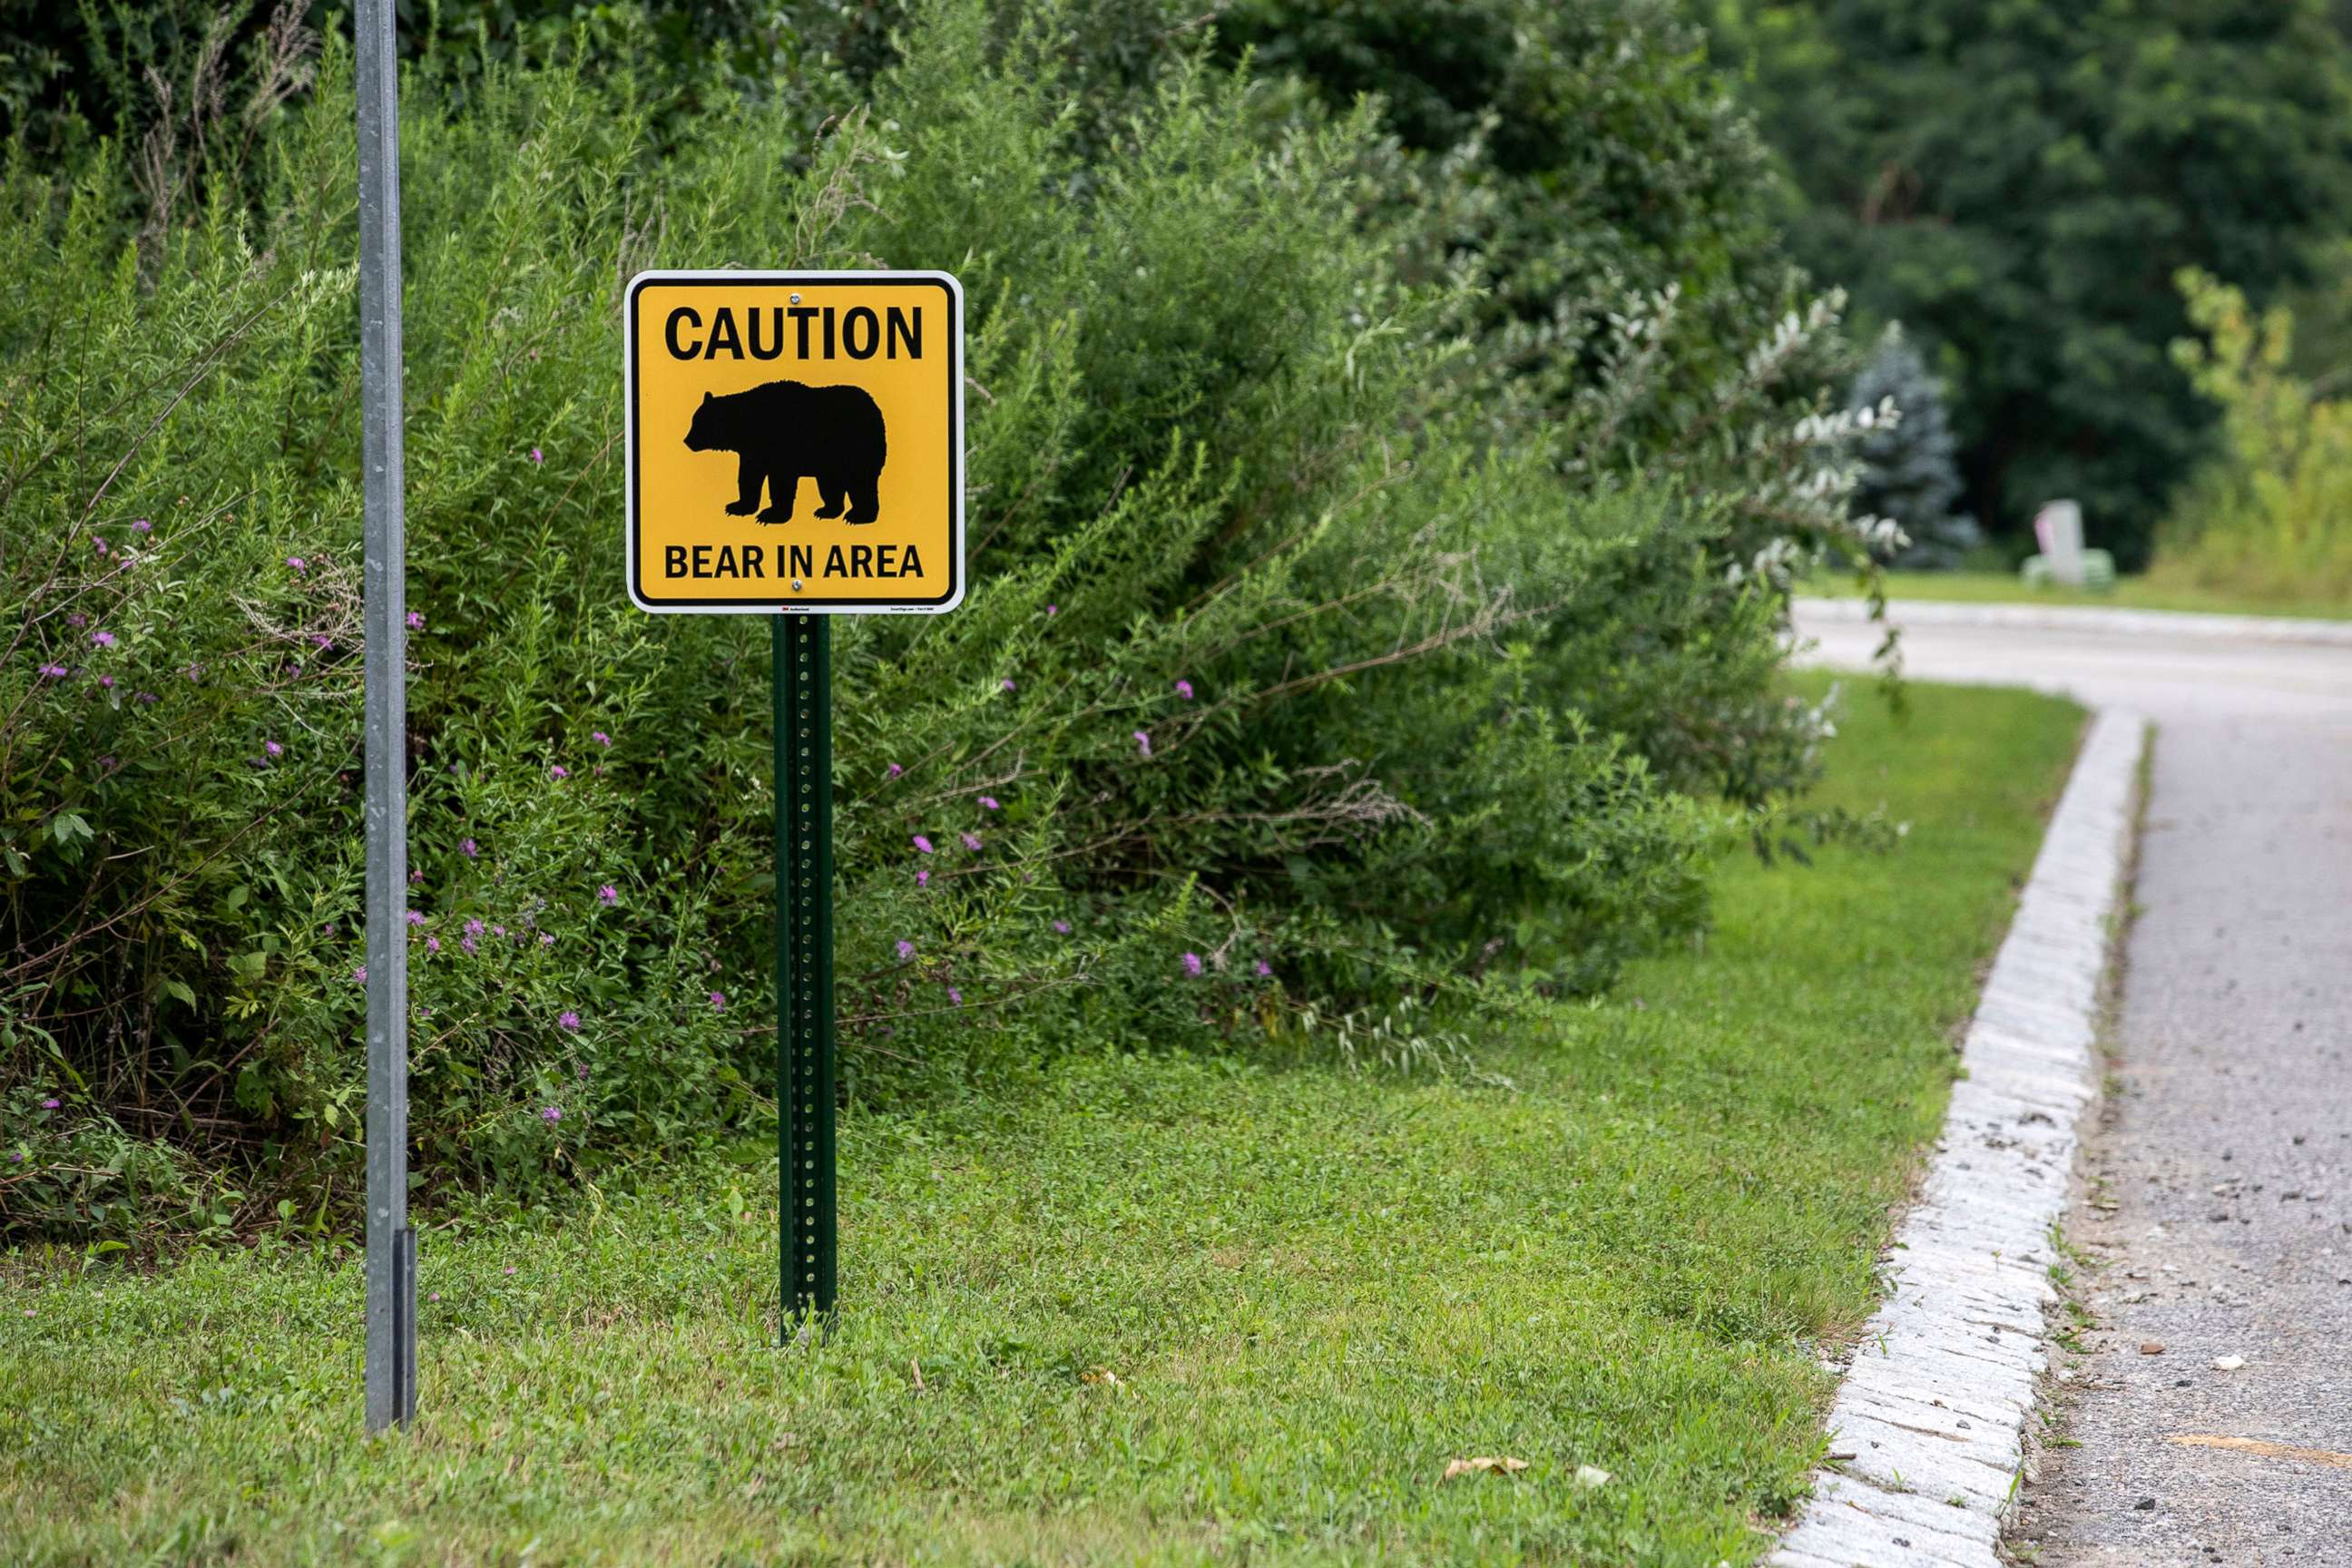 PHOTO: In this Aug. 6, 2020, file photo, signage warns of "Bear in Area" in Hardyston Township, N.J. Black bears live in these woods near a residential neighborhood. 